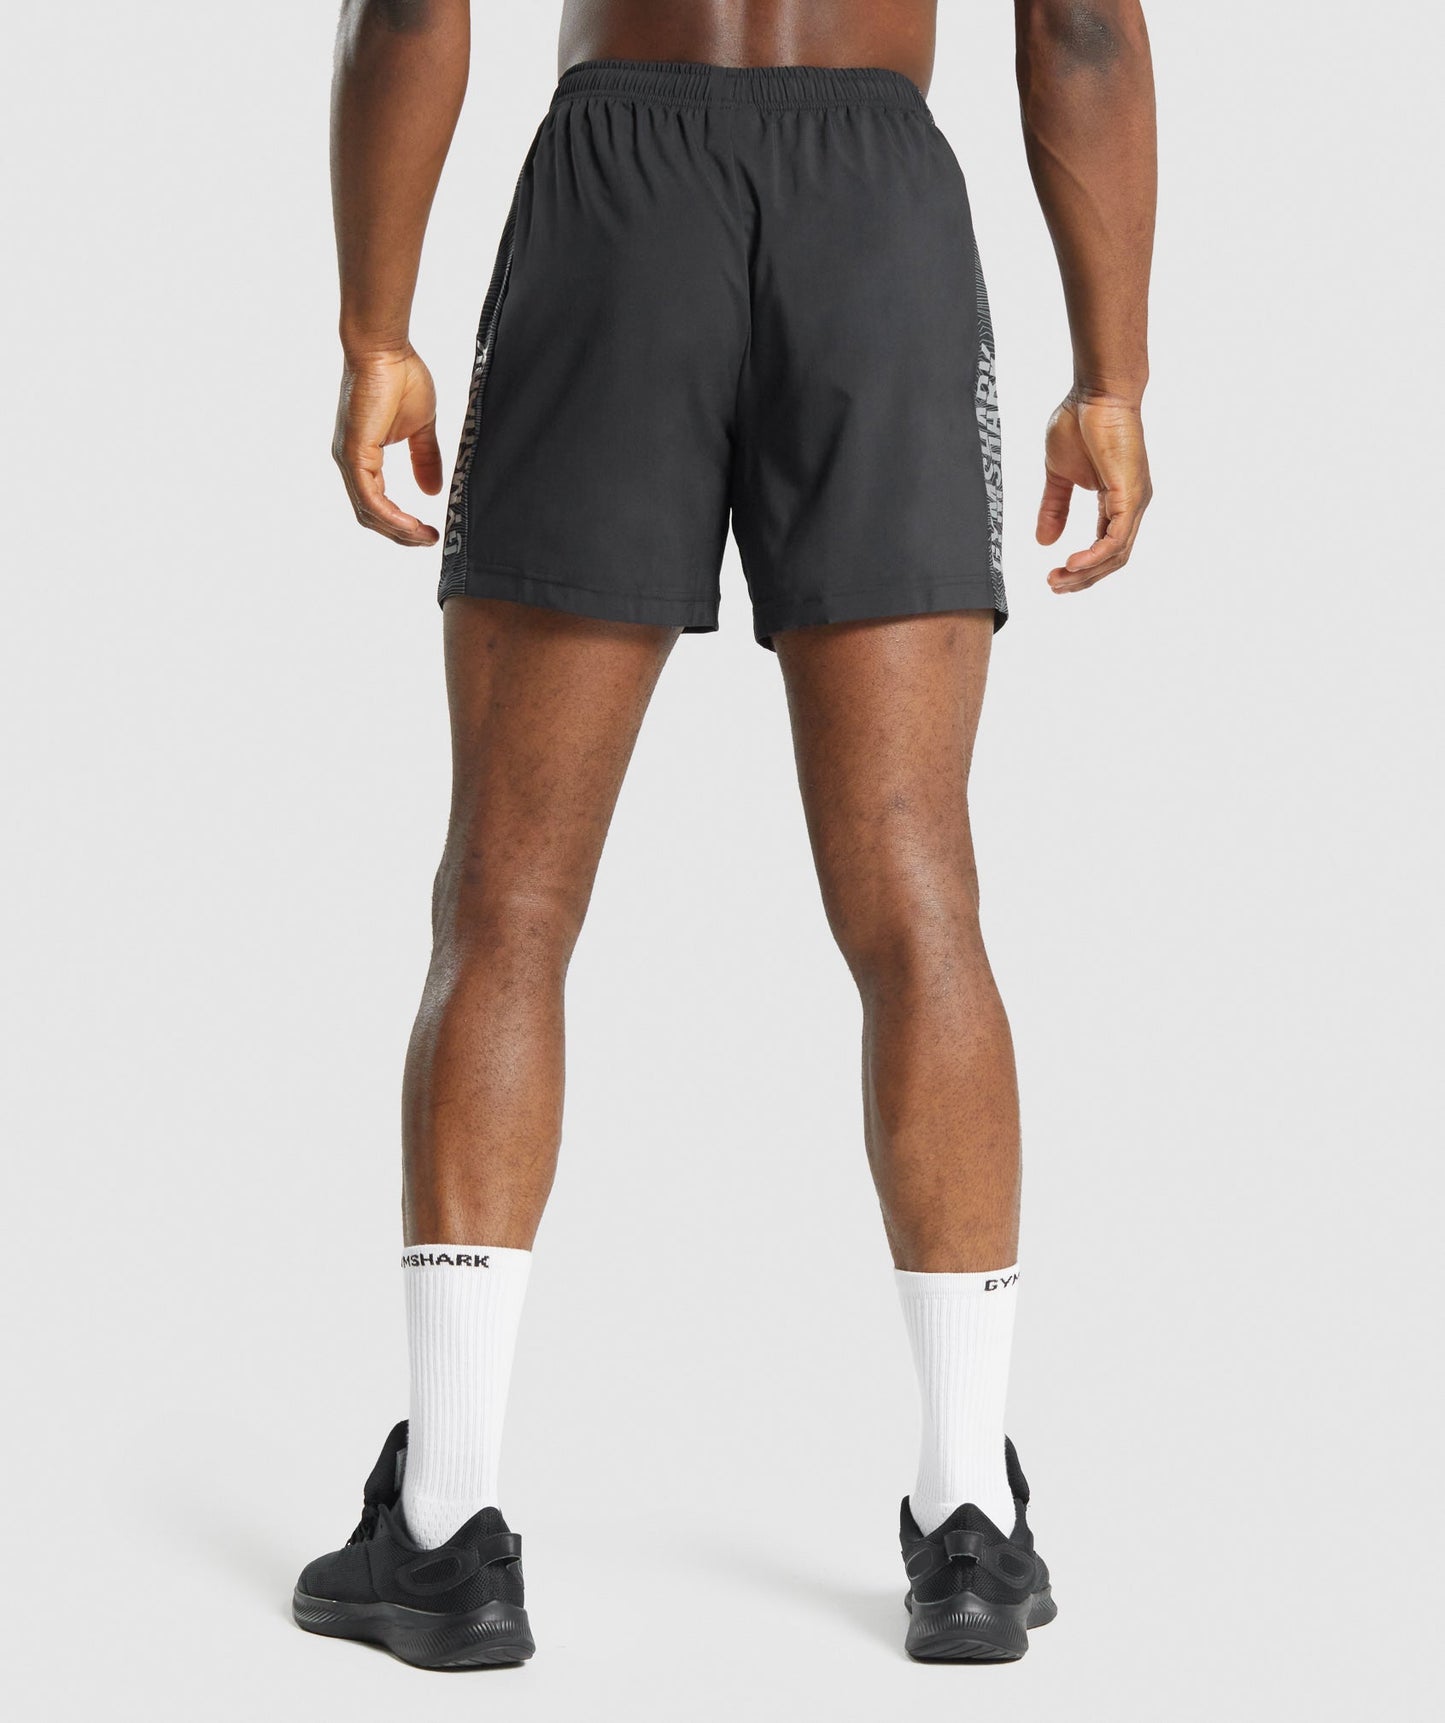 Gymshark Graphic Sport Shorts - Black – Client 446 100K products